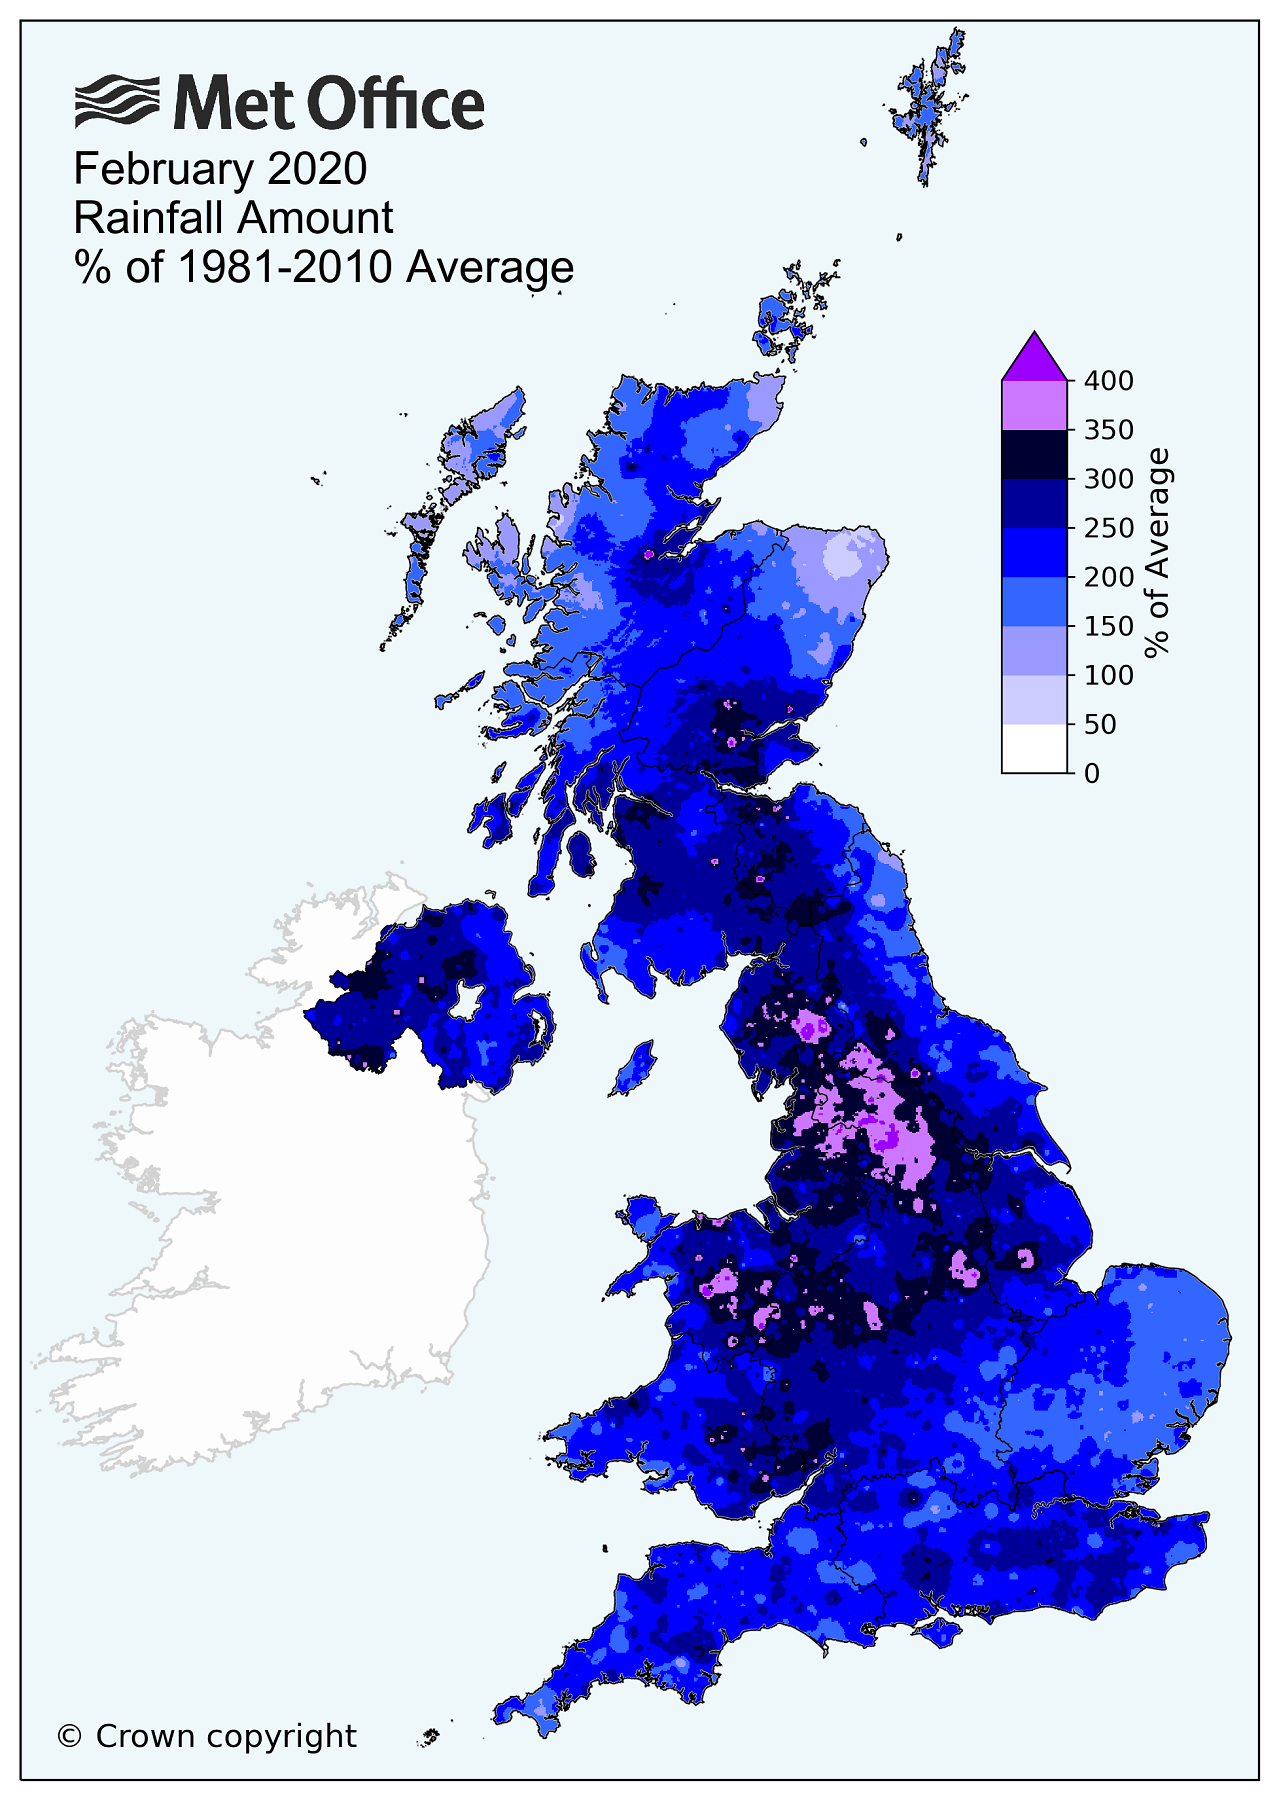 Map showing the amount of rainfall across the UK in February 2020, as a percentage of the 1981-2010 average. Almost all regions report more than 150% of the 1981-2010 average, with some locations in central and northern England reporting as much as 400% of the 1981-2010 average.